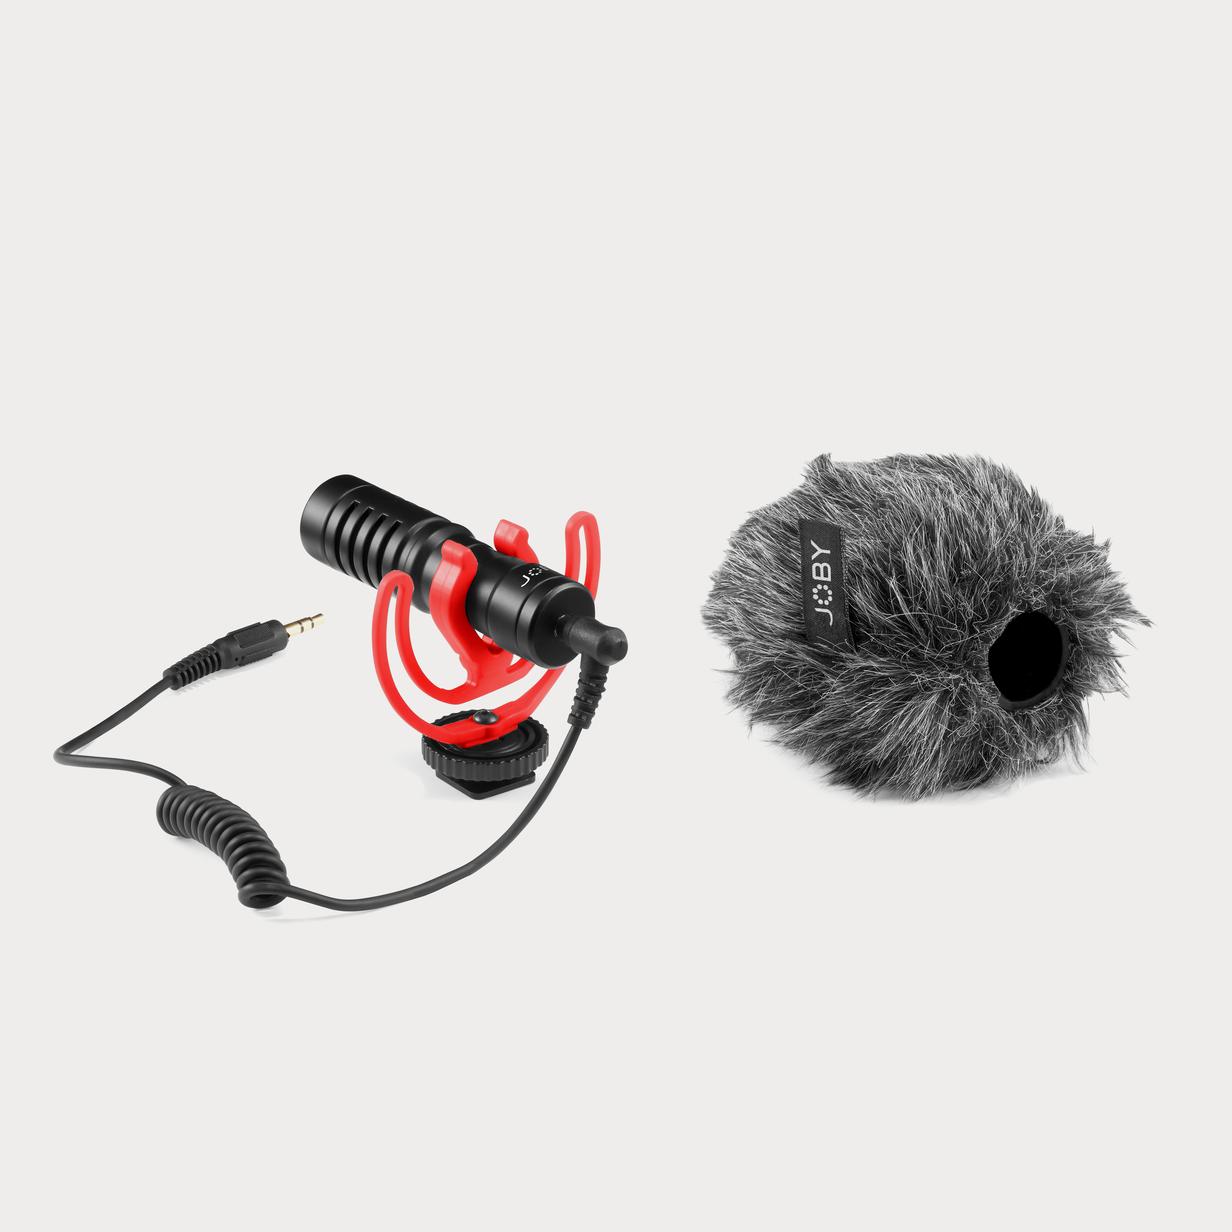 Vlogging iPhone Microphone Deadcat Windscreen for Smartphone Professional Microphone YouTube JOBY Wavo Mobile Compact On-Camera Microphone with Rycote Shock Mount Phone Microphone Camcorder 